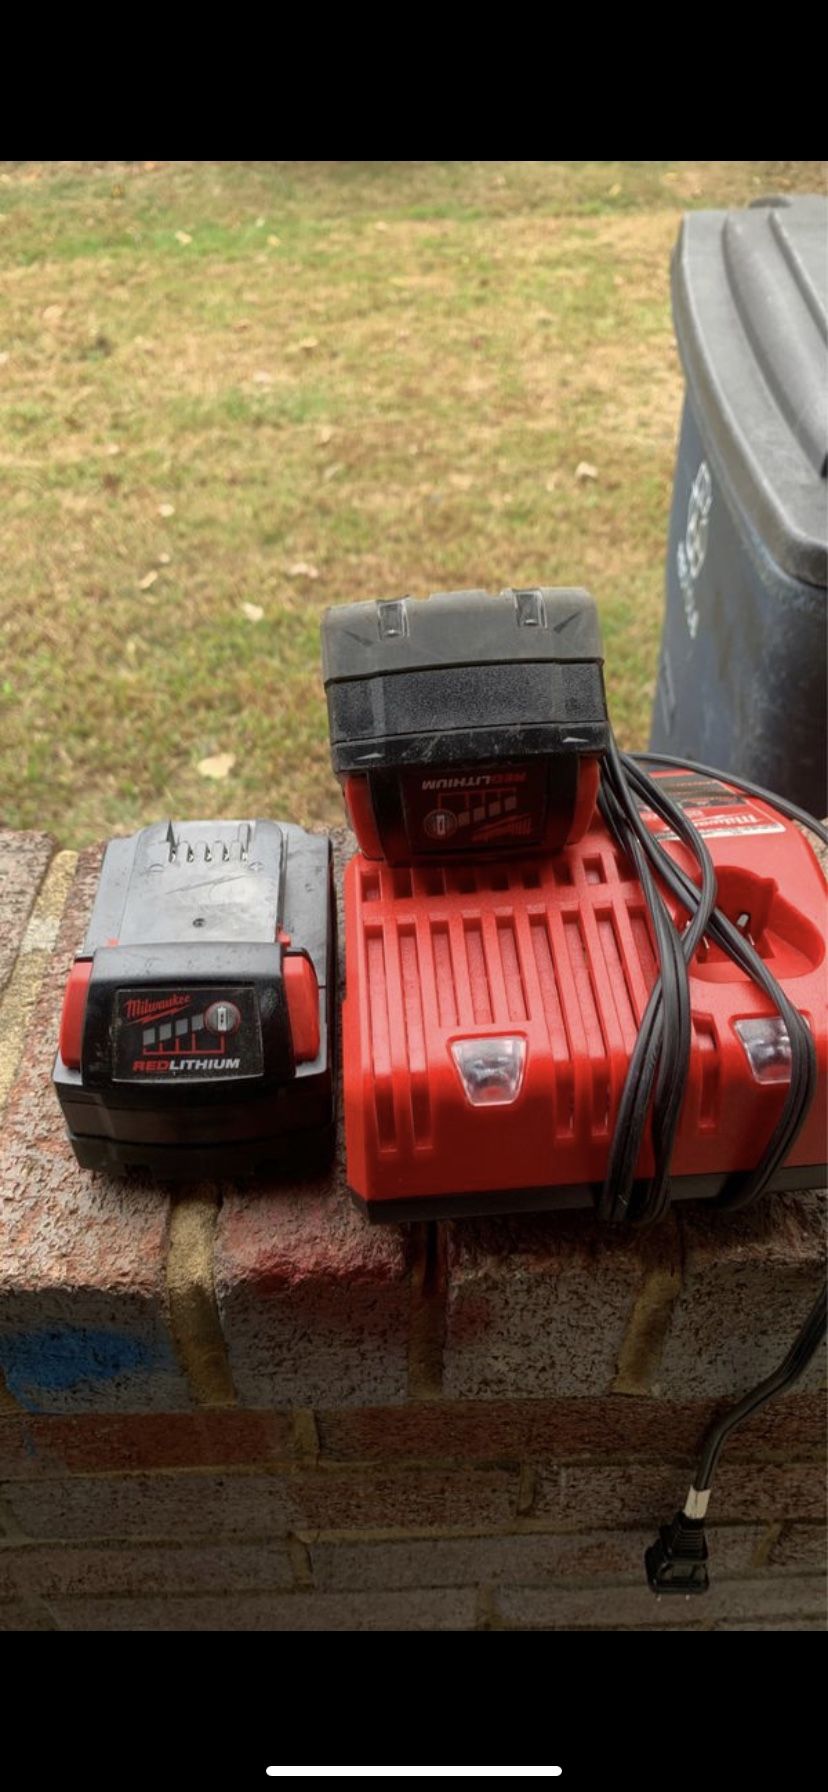 Milwaukee 1/2 impact and 2 battery + charger